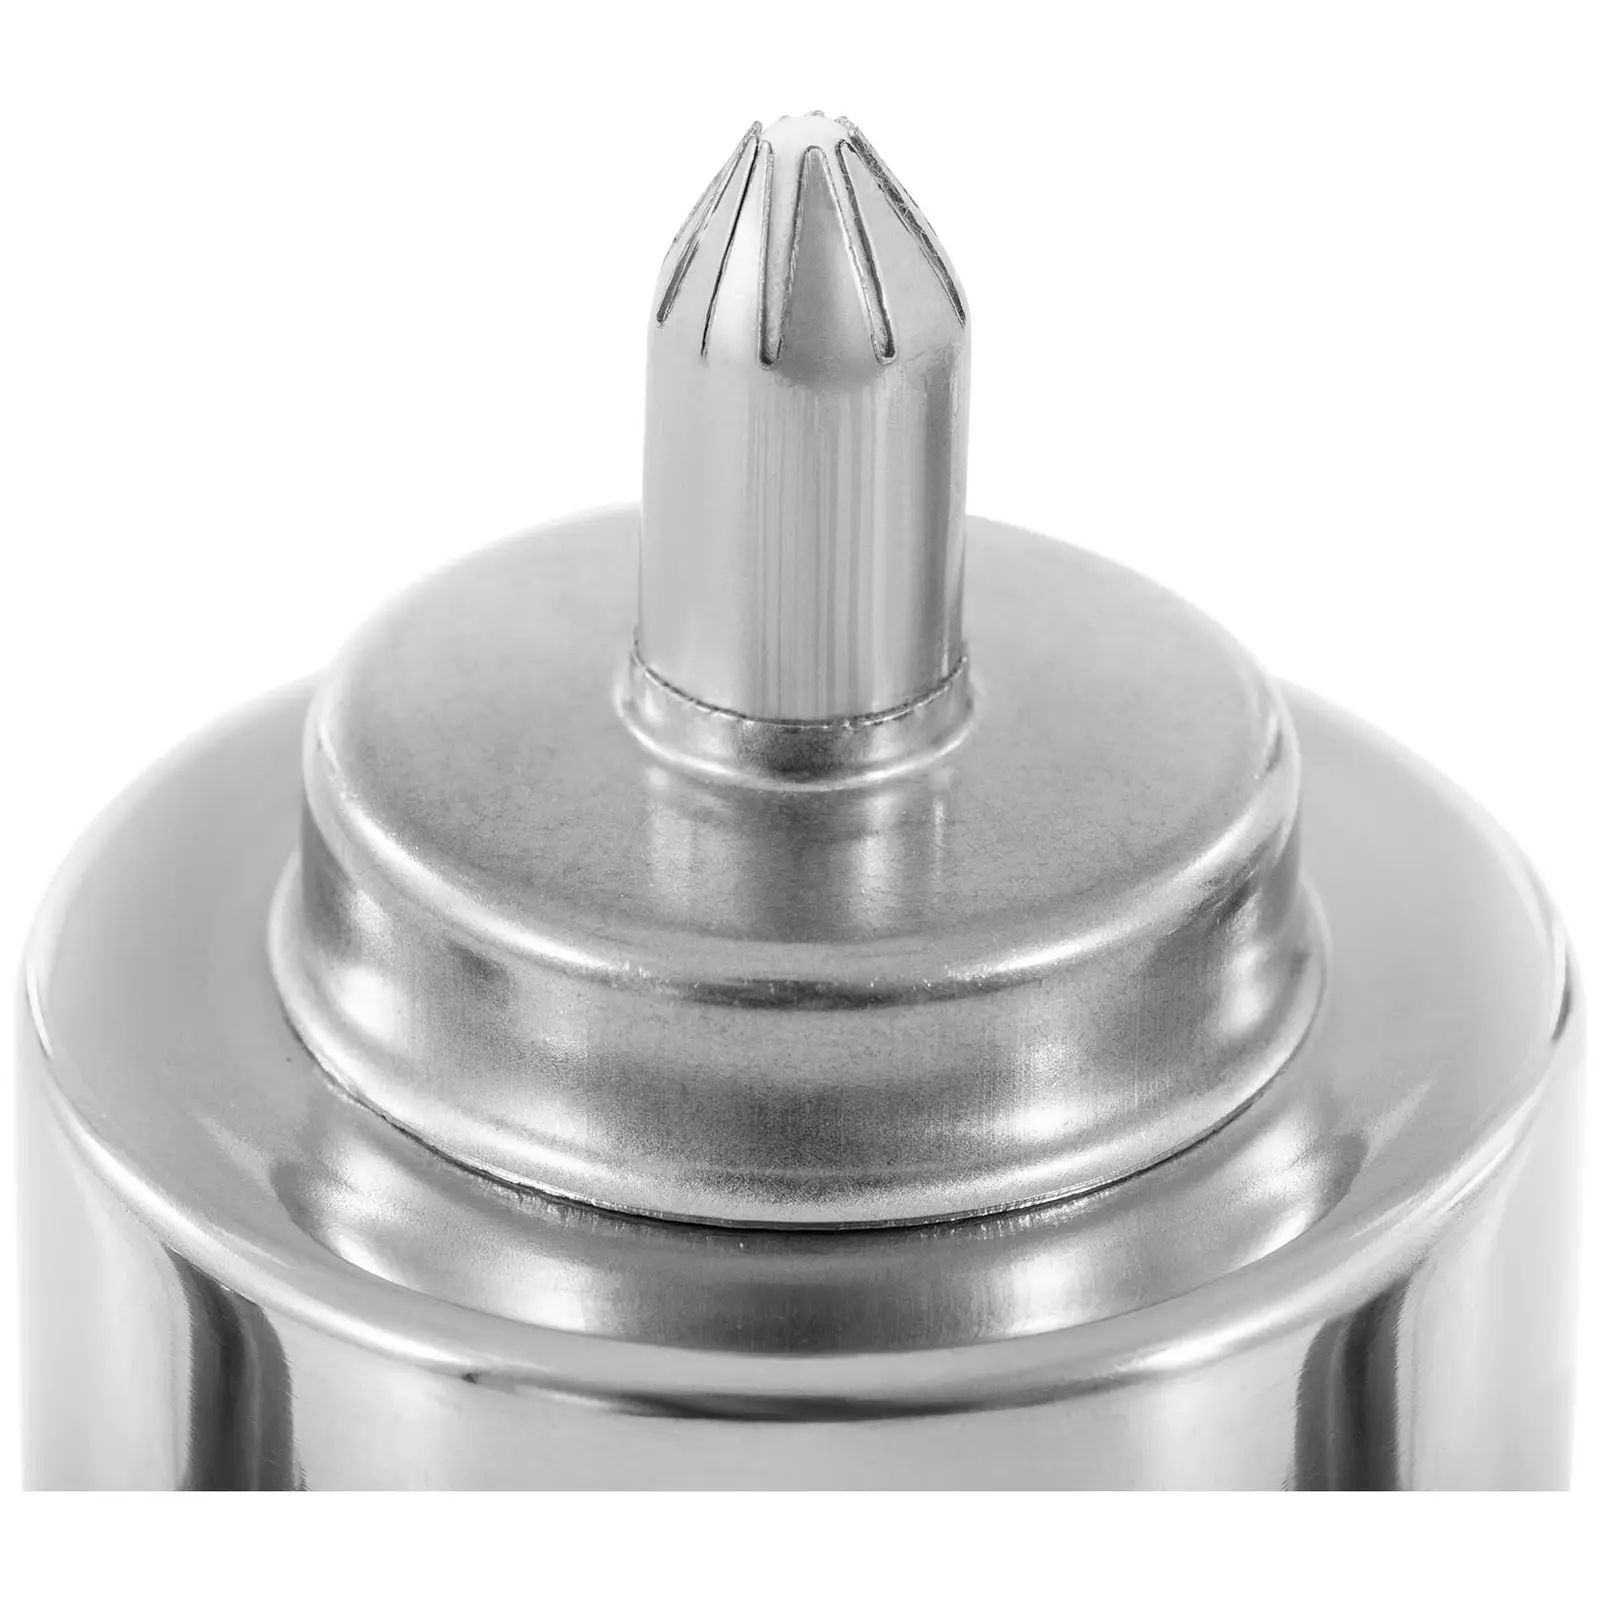 Alcohol Burner - 2 pieces - 0.2 L - burning time: 1.5-2 h - stainless steel - with wick and lid